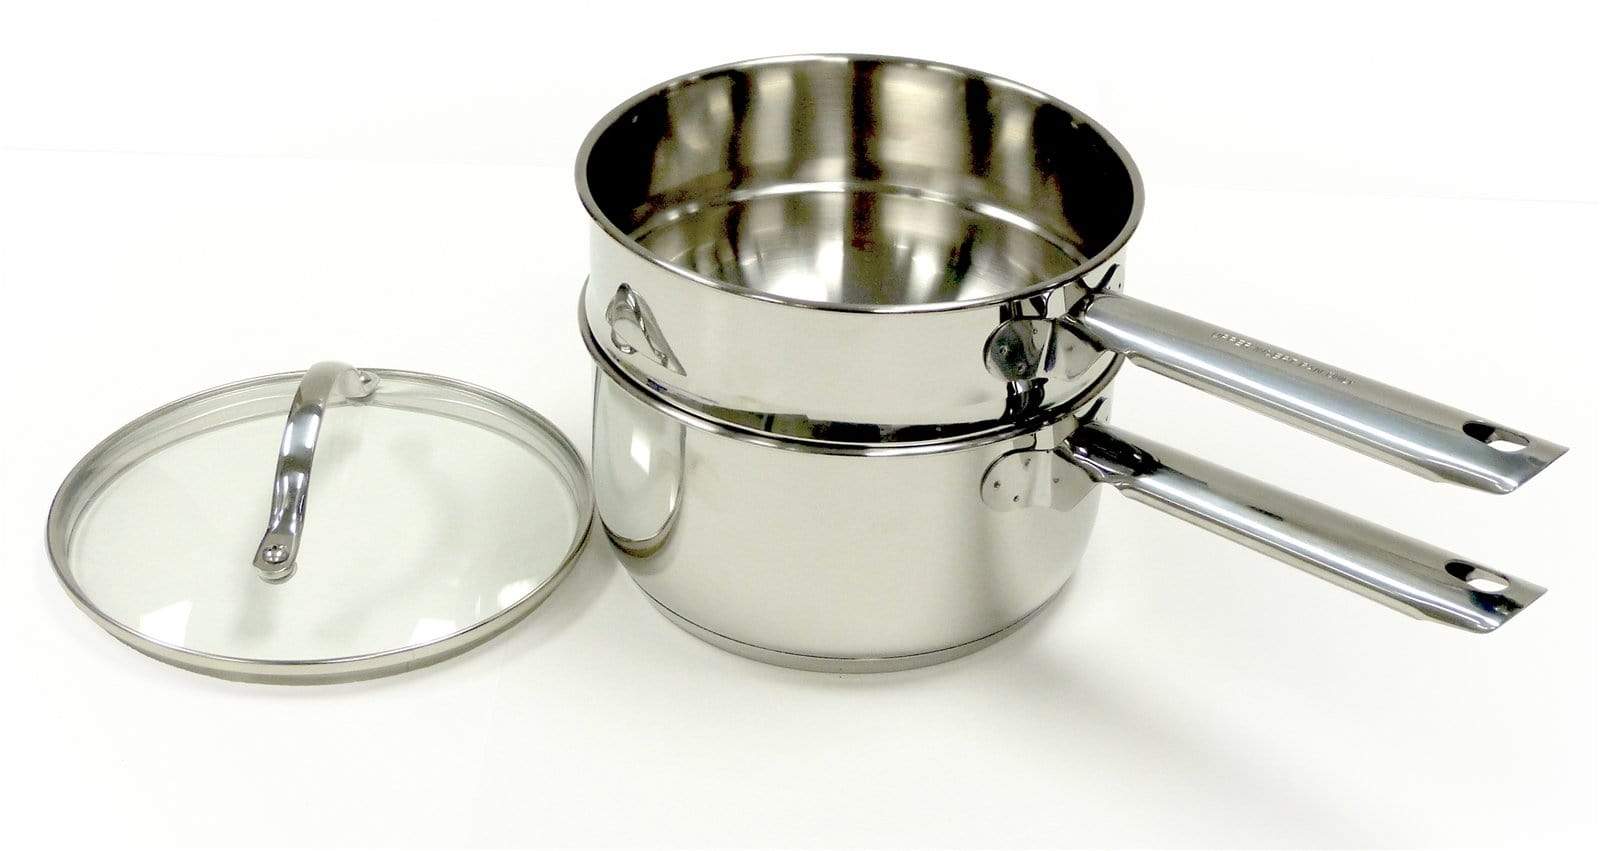  Ibili Stainless Steel All in One Piece Double Boiler